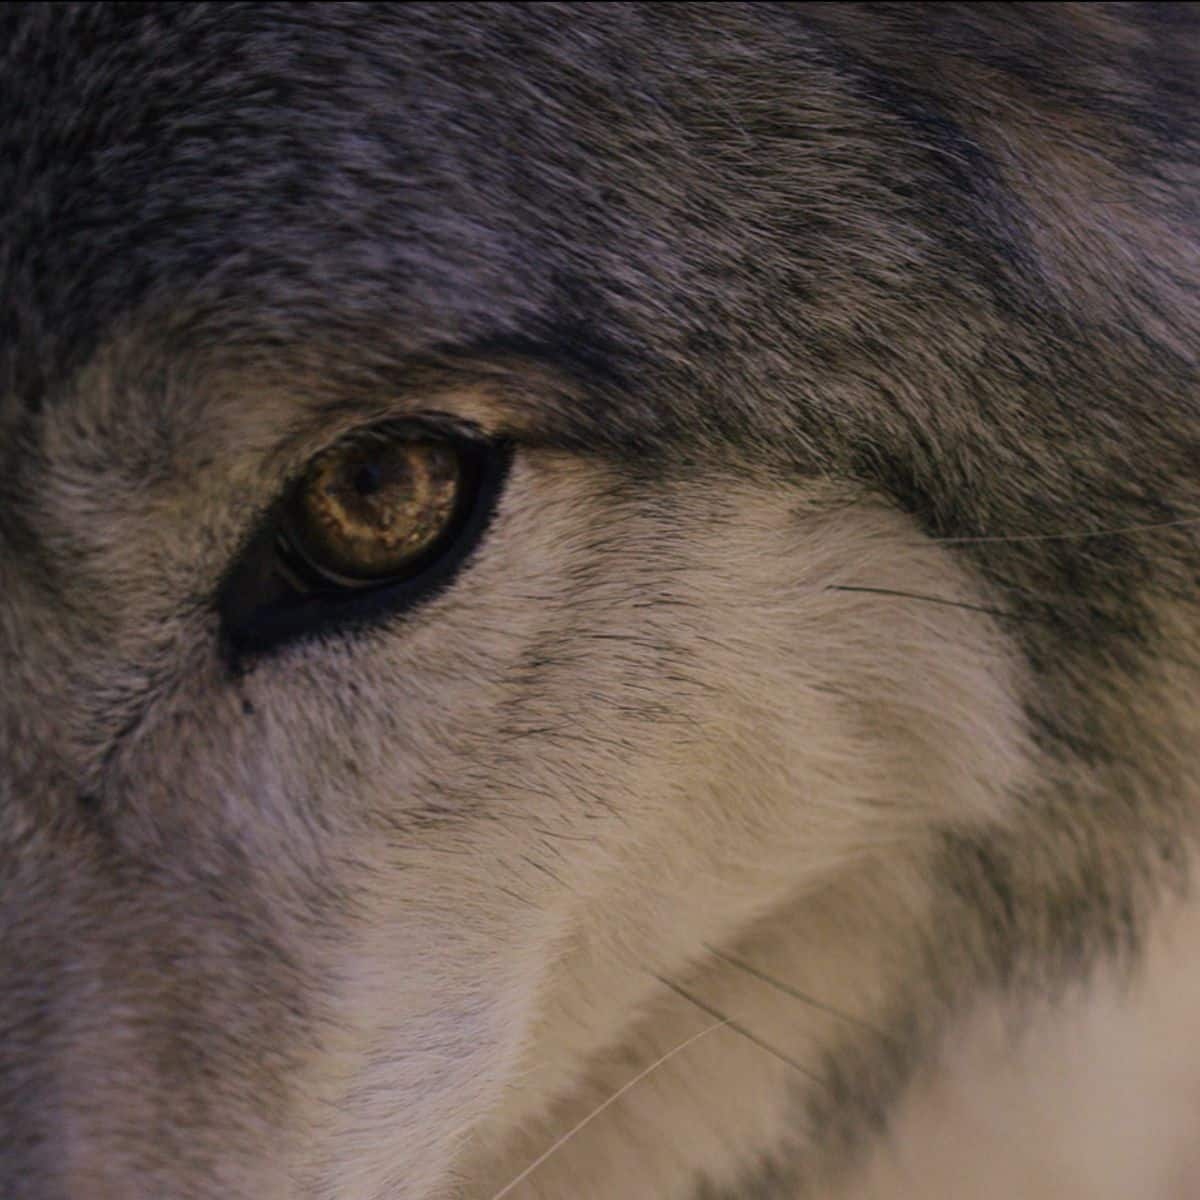 Staring into the eye of a wolf